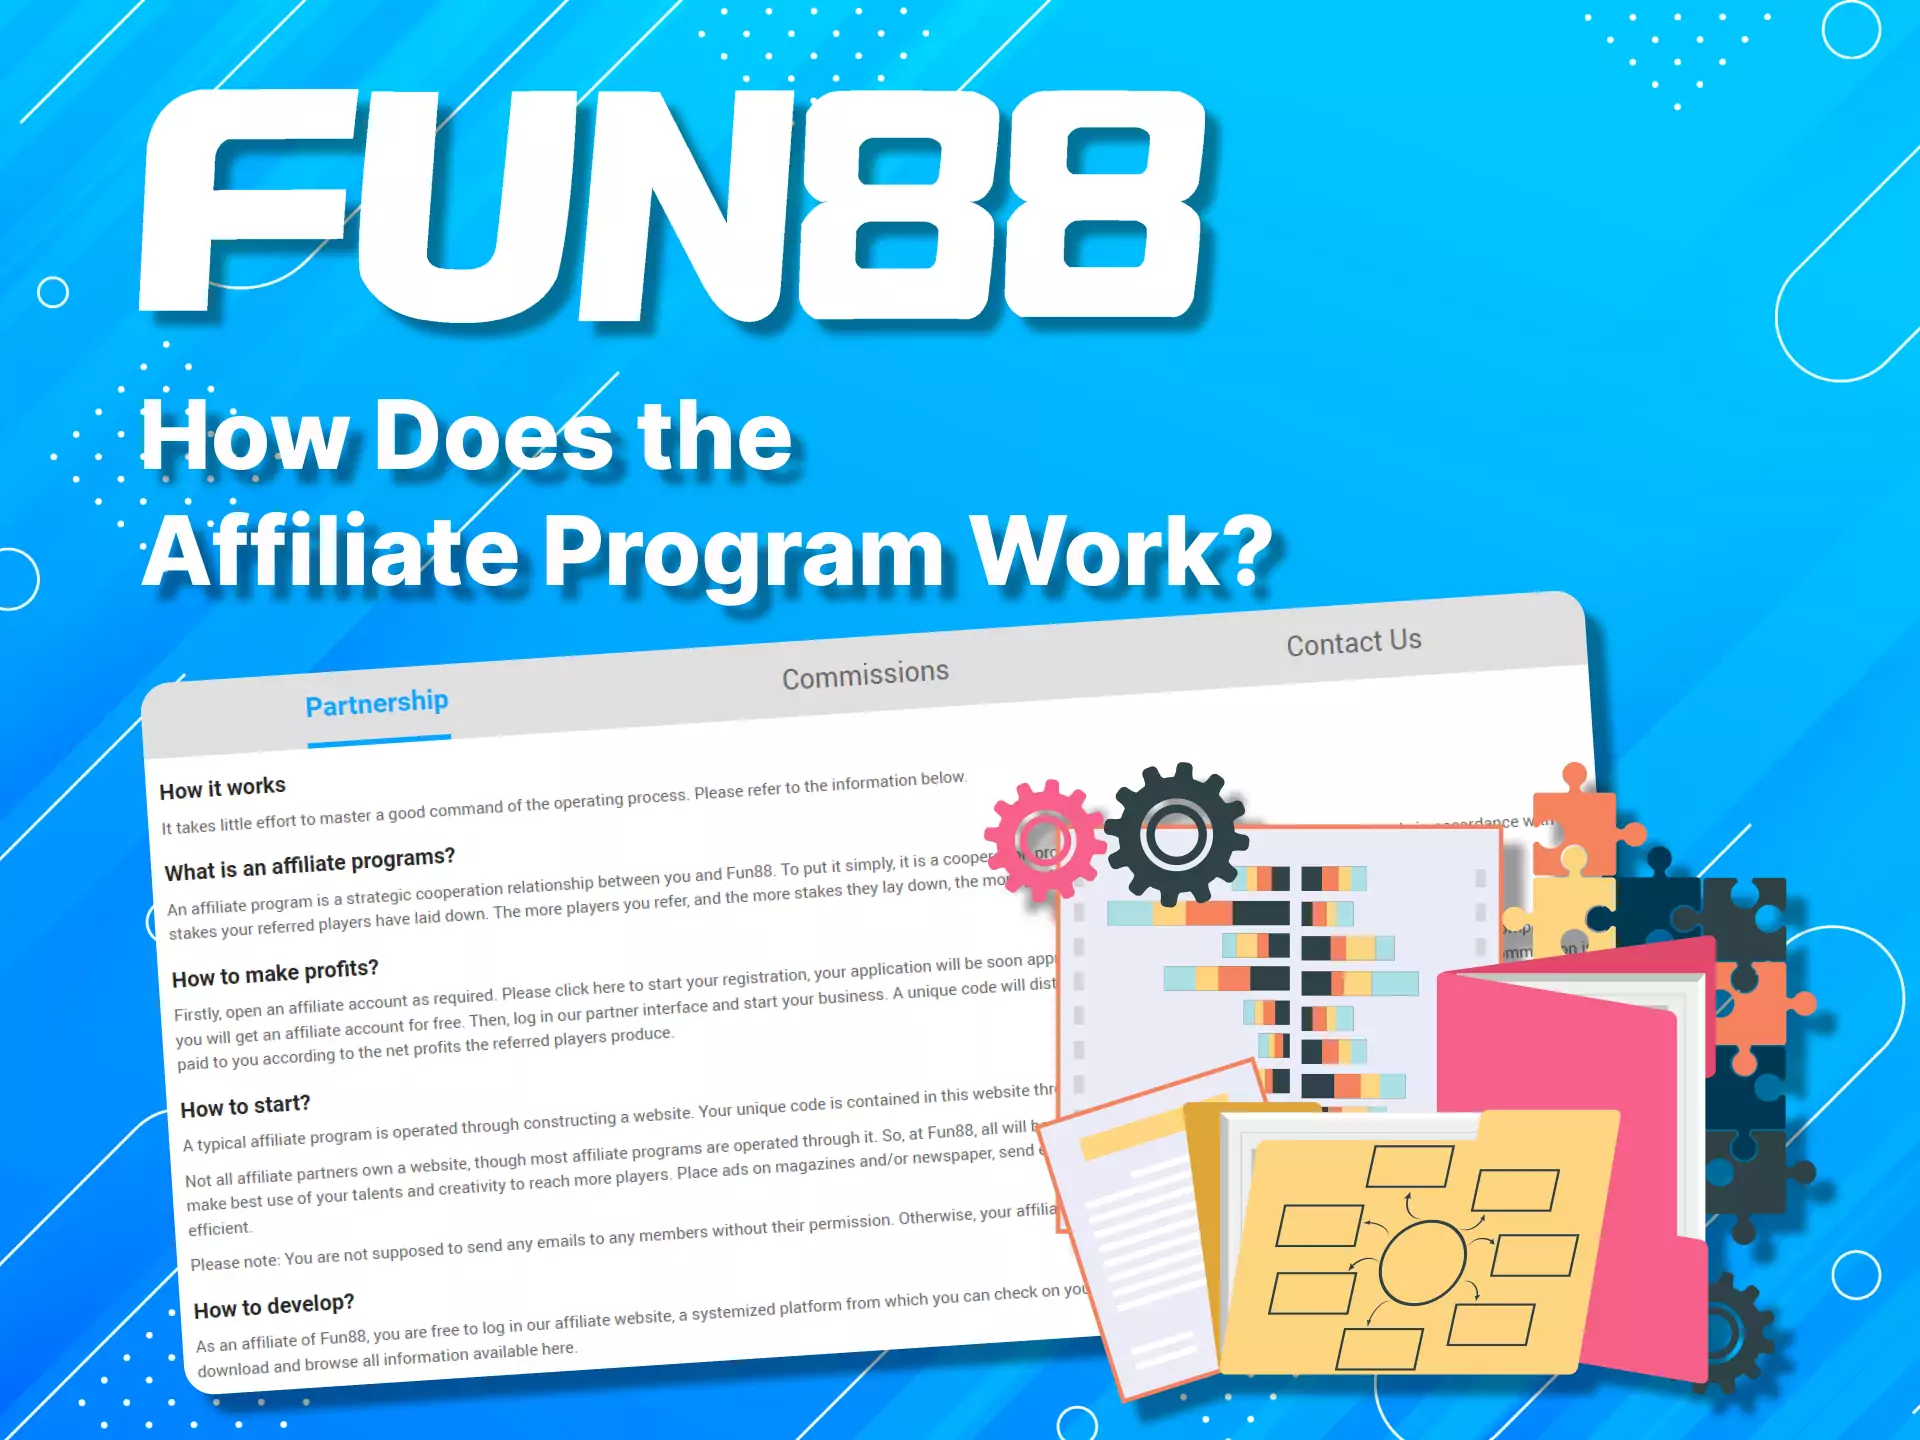 Learn more about how the Fun88 Affiliate Program works.